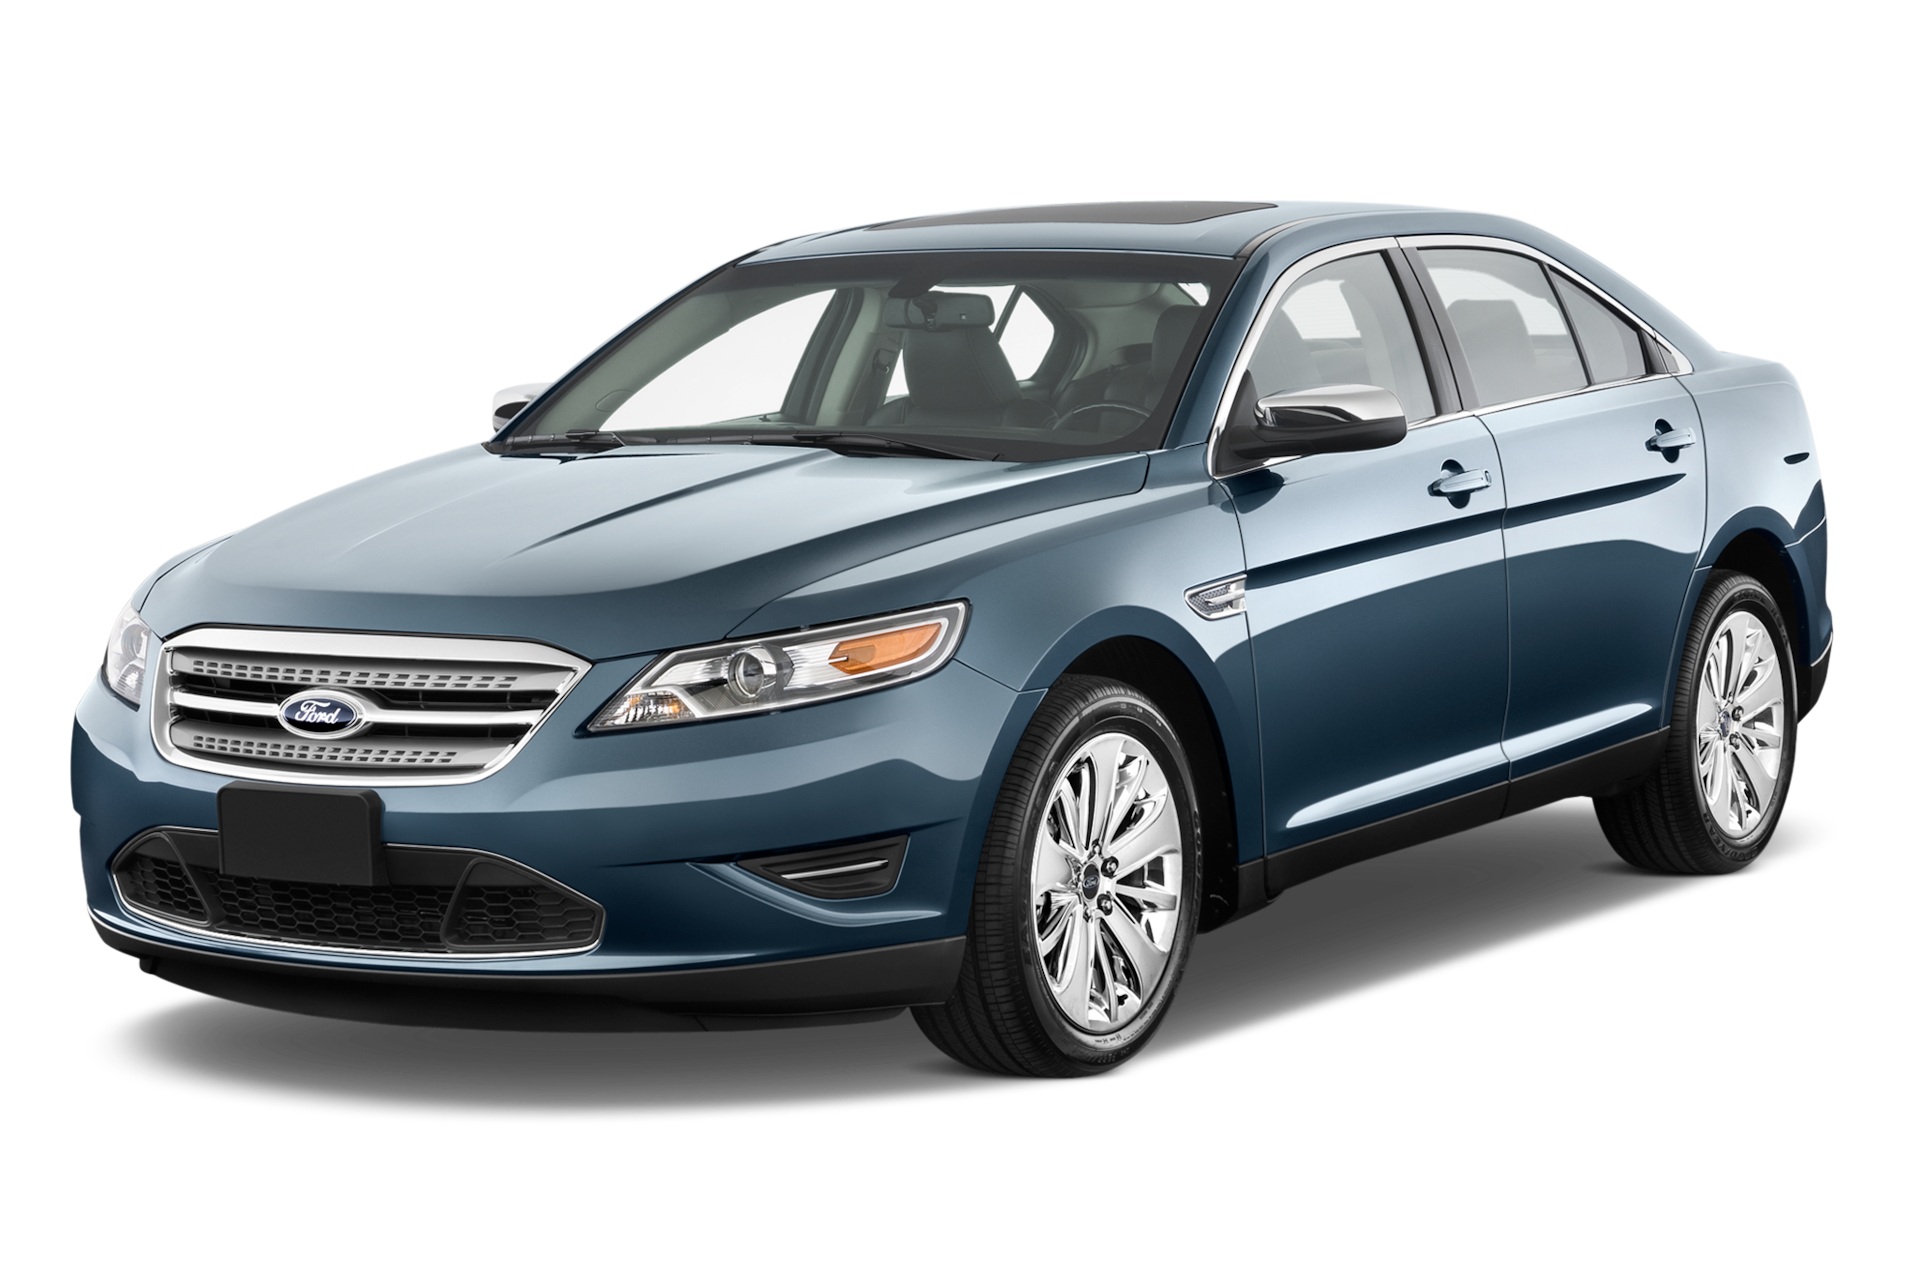 2010 Ford Taurus Prices, Reviews, and Photos - MotorTrend